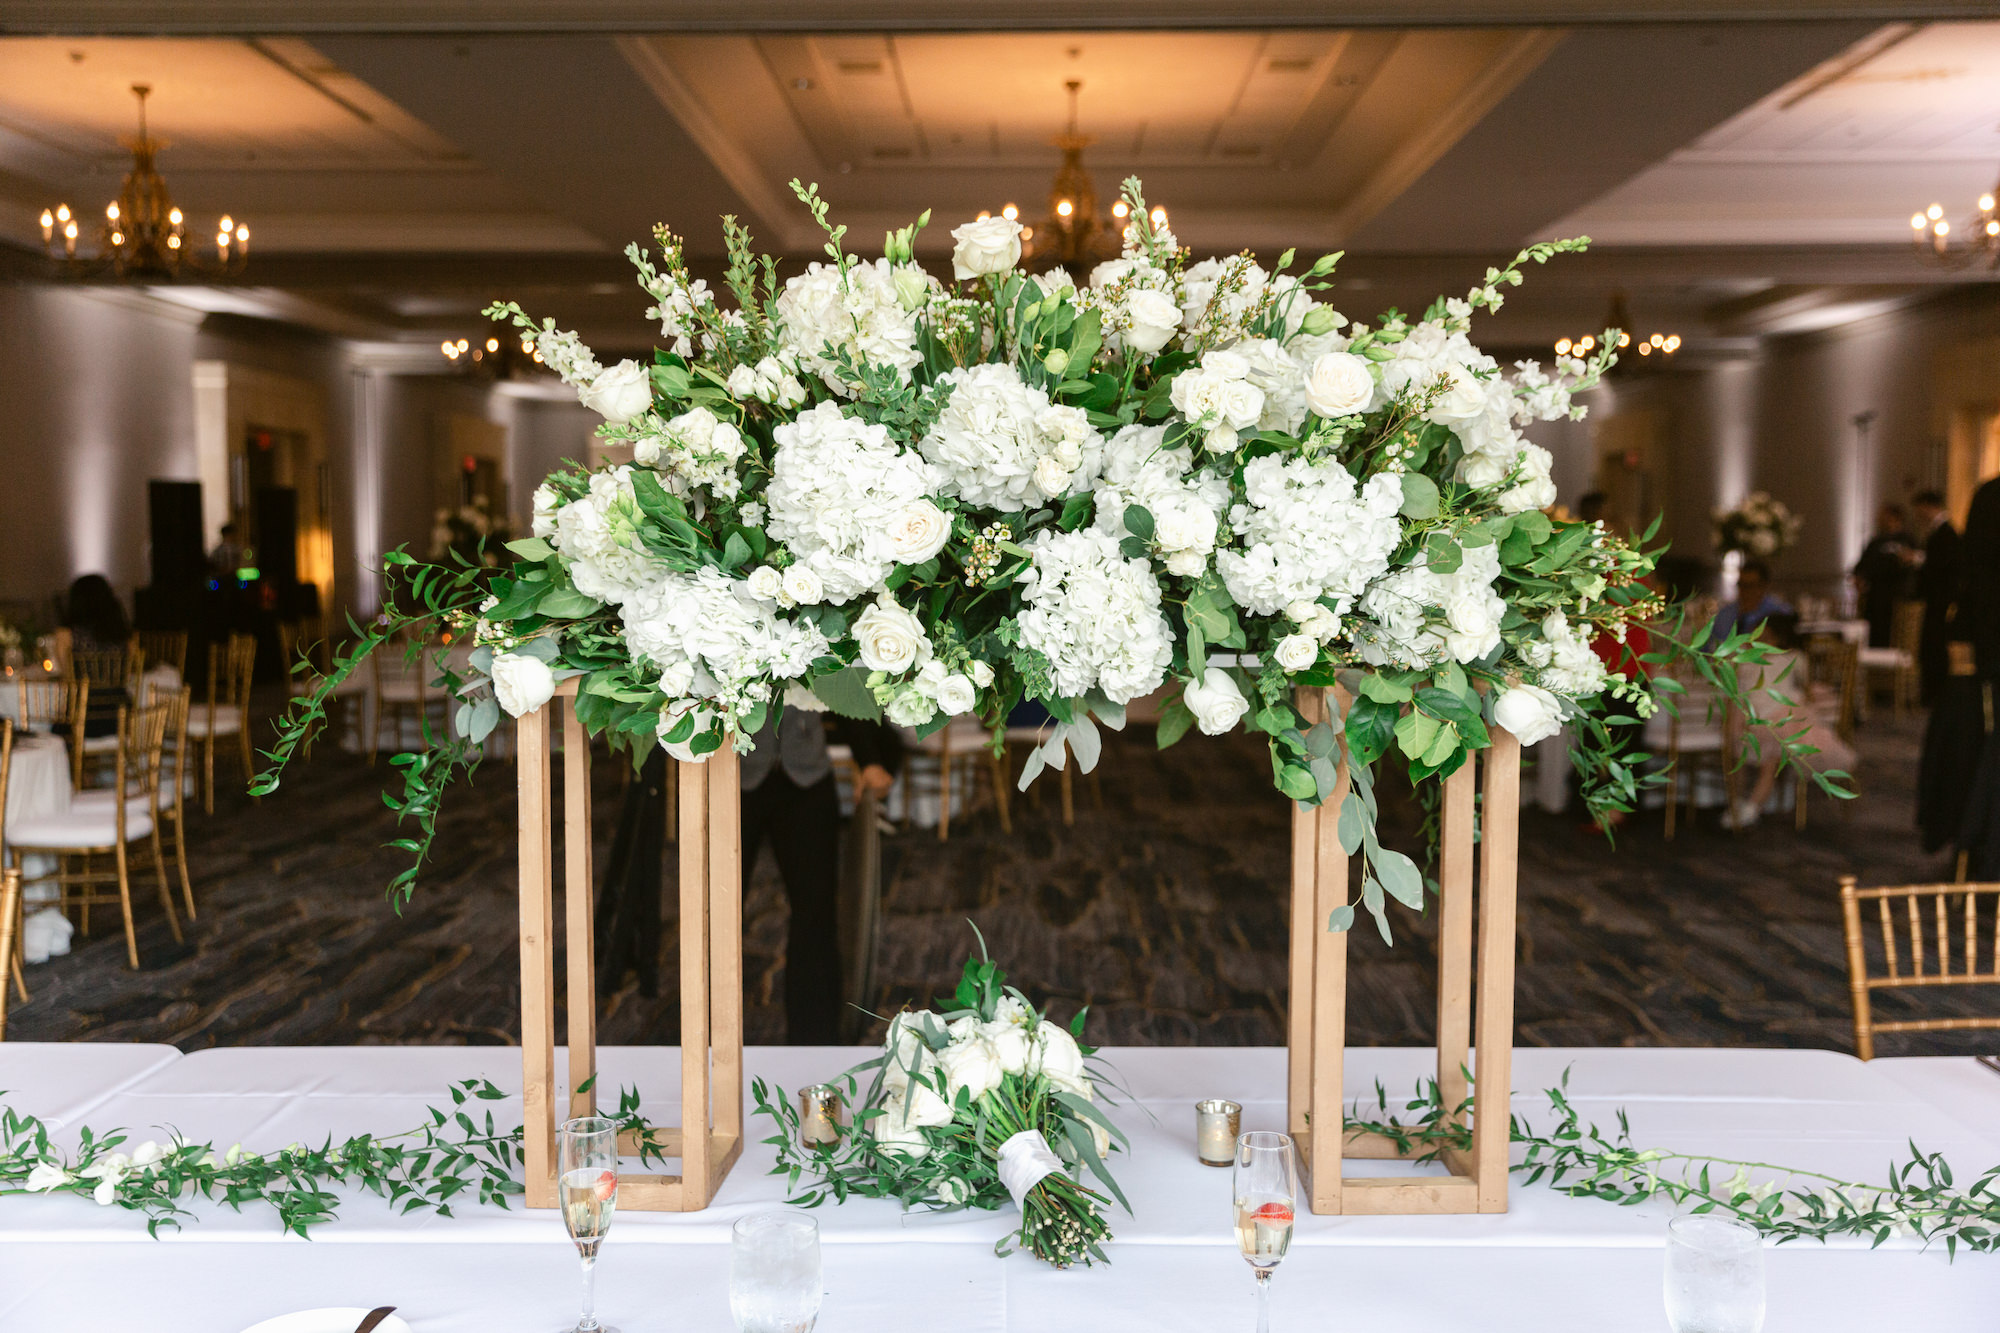 Classic Wedding Reception Floral Centerpiece for Head Table, Greenery with White Hydrangeas and Roses on Modern Gold Rectangular Stands | Tampa Bay Wedding Florist Save The Date